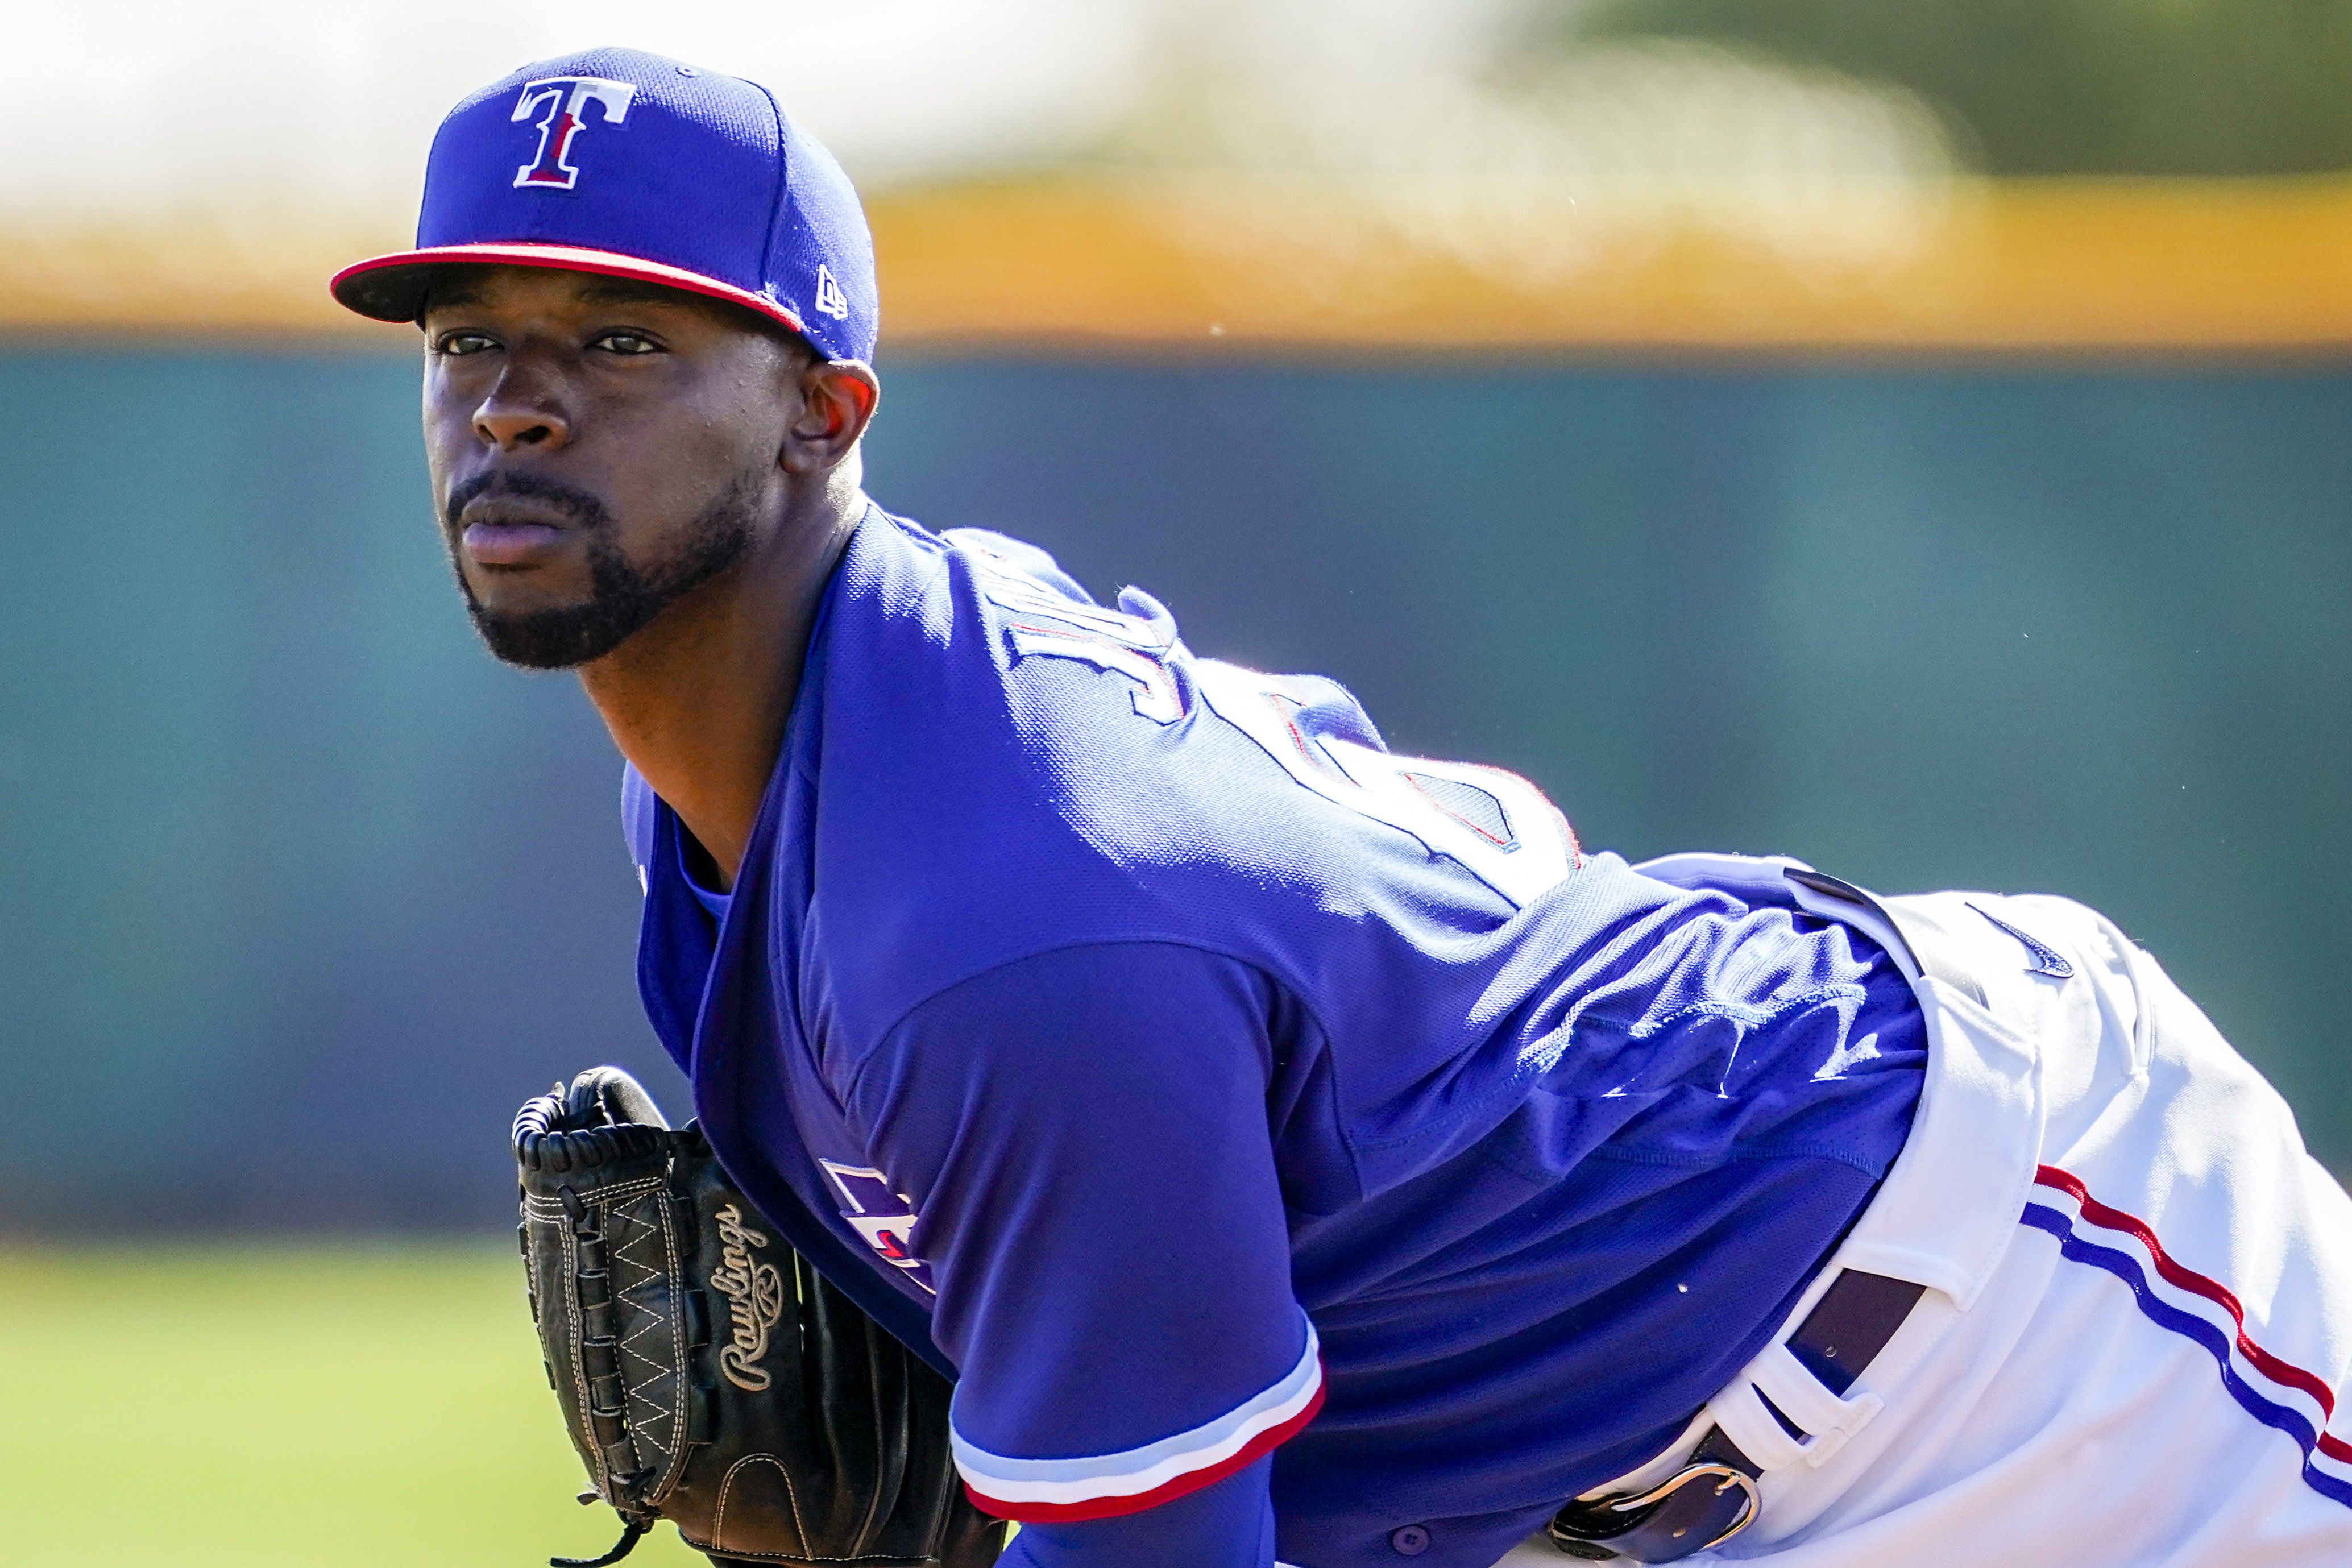 As an outfielder-turned-pitcher, Rangers' James Jones is still hopeful of  making a different kind of MLB debut